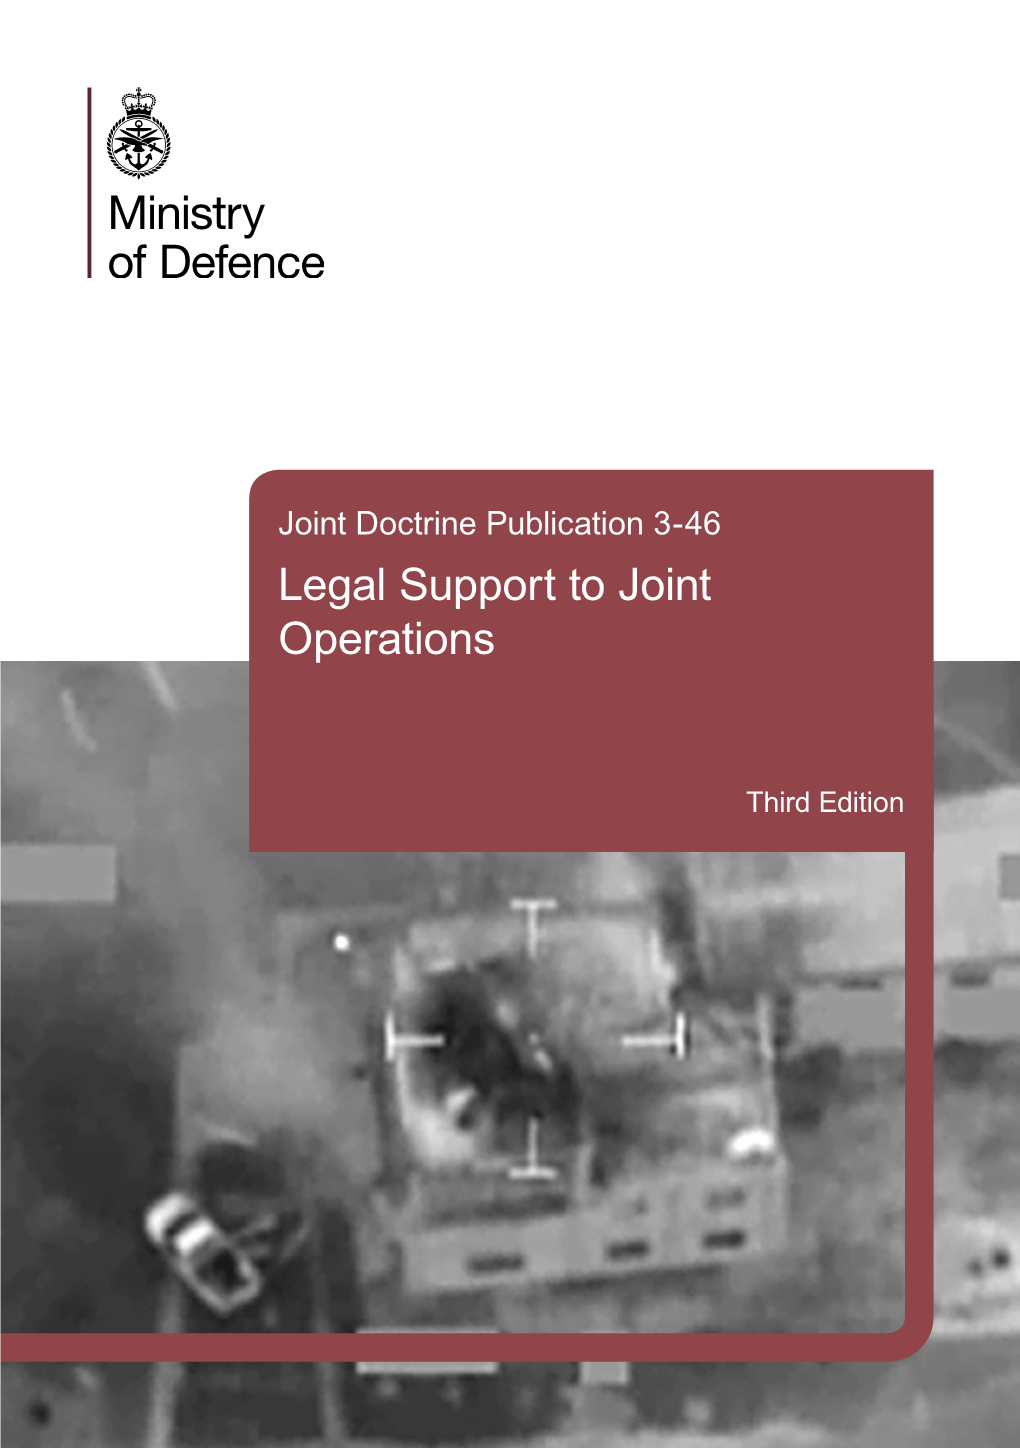 JDP 3-46, Legal Support to Joint Operations (3Rd Edition)